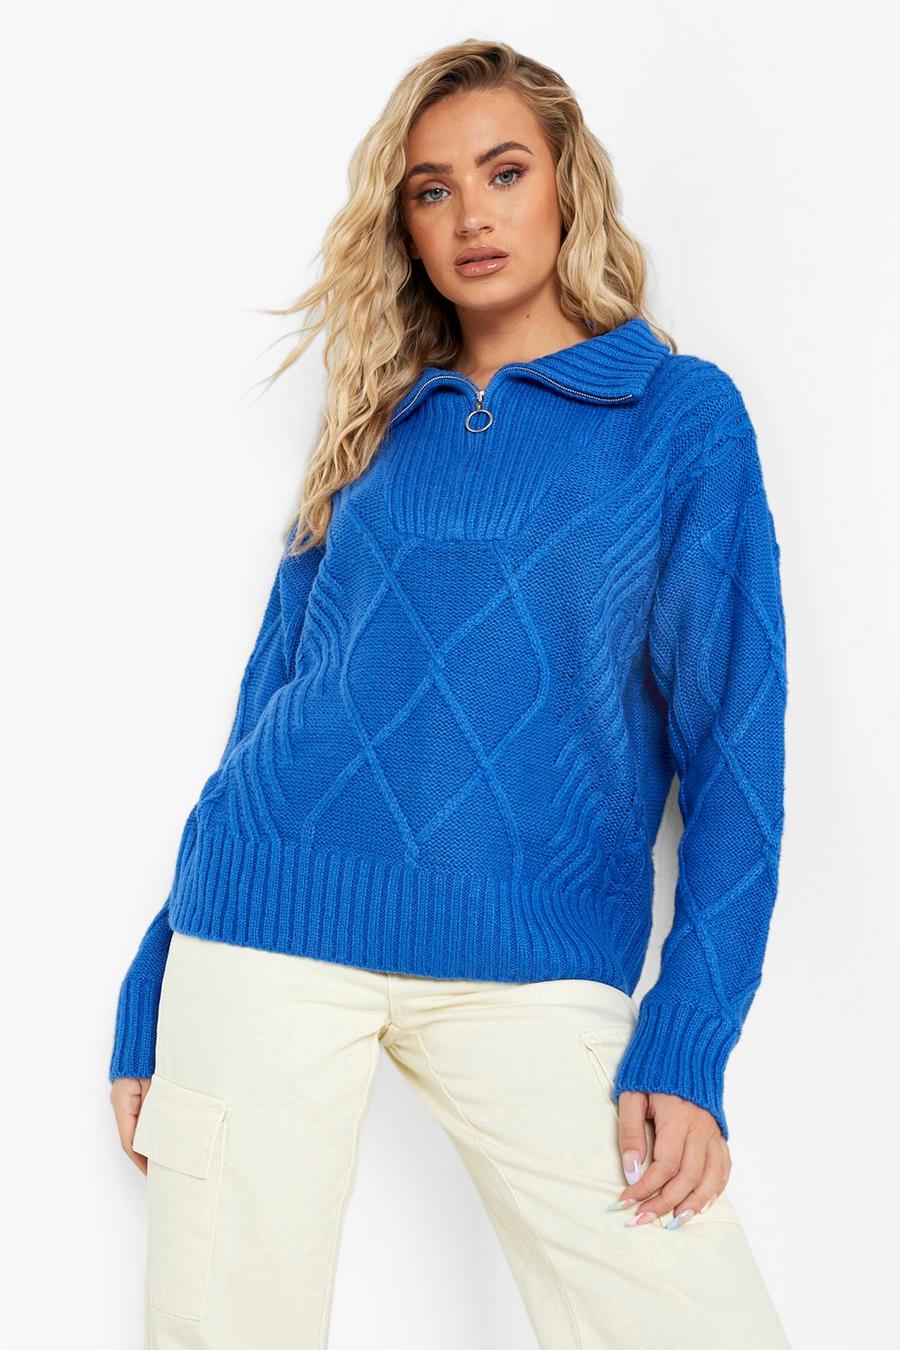 Cobalt blue Chunky Rib Collar Cable Knit Jumper